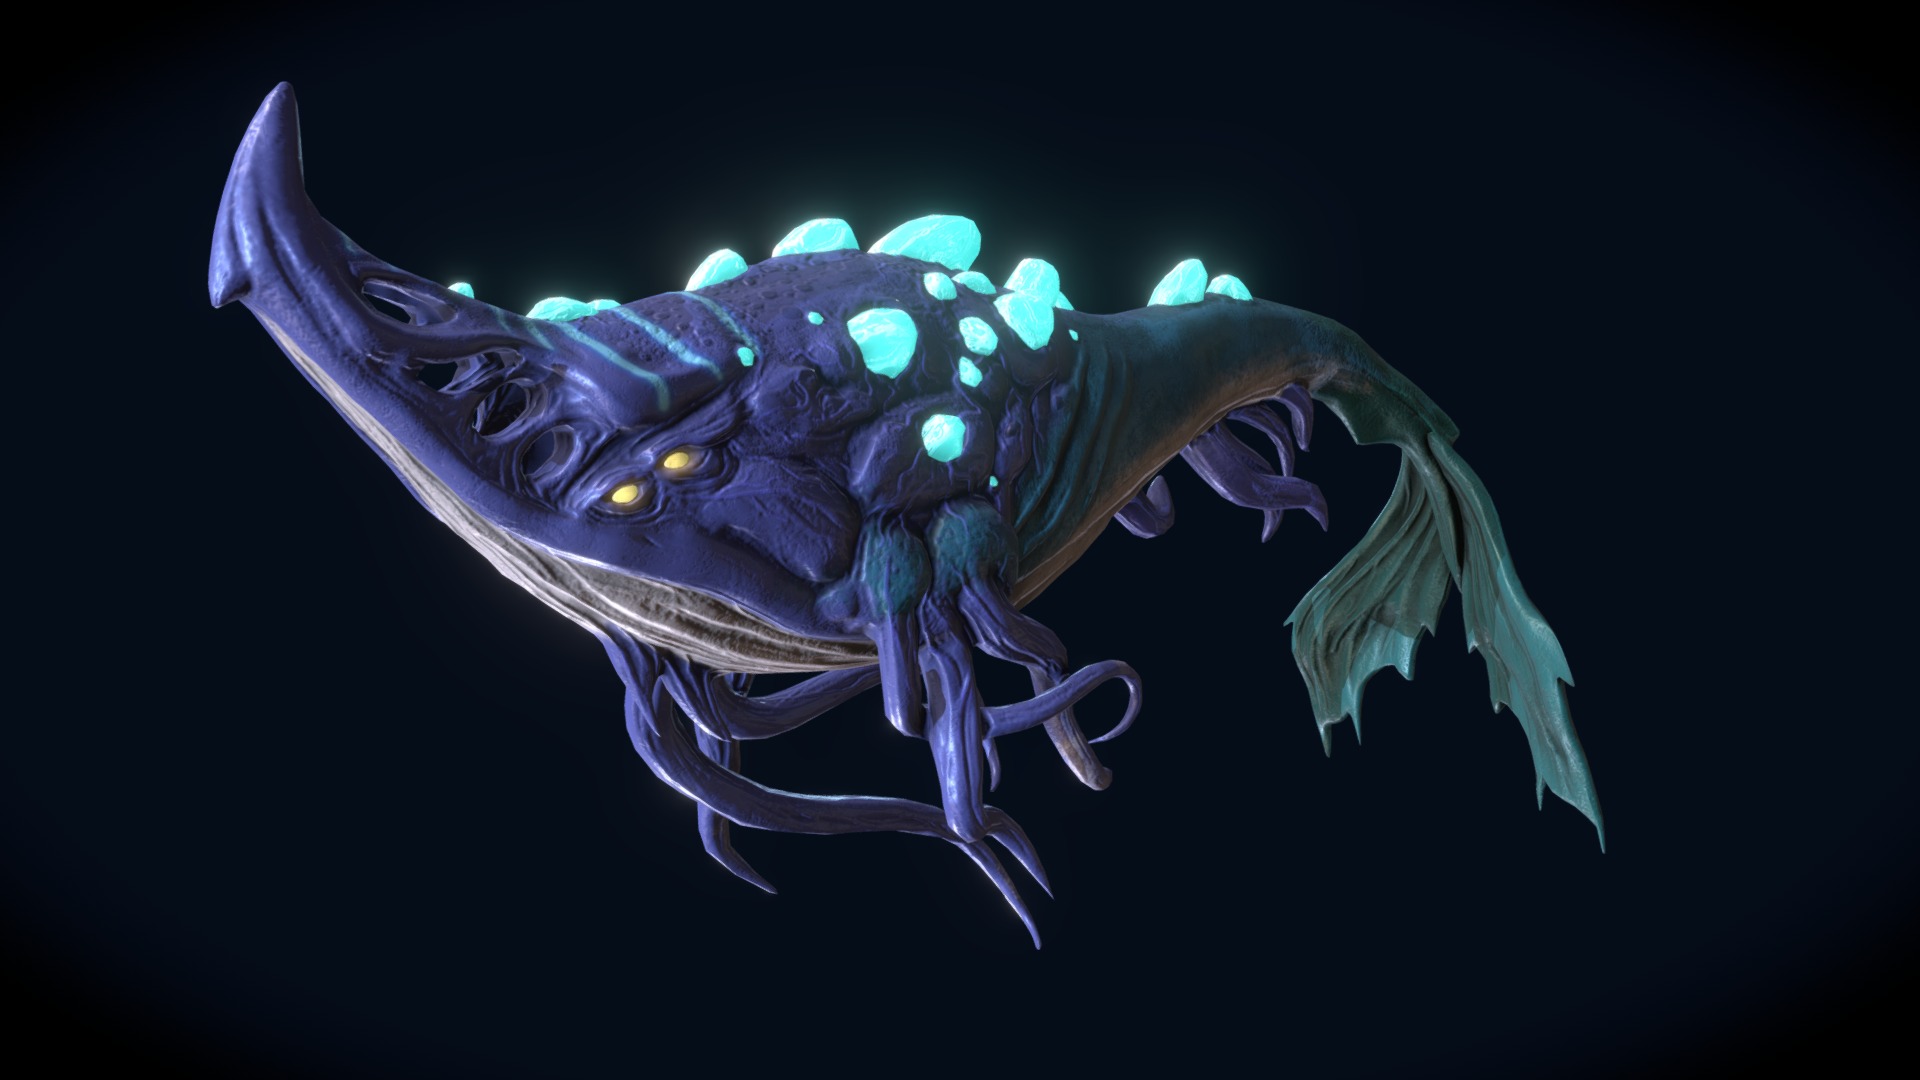 &ldquo;This Fungal Whale is one of the most dangerous animals from the Zangar Sea in Draenor. It's a massive-agressive beast that has killed countles orcs who are dumb enough to try to swim around it.